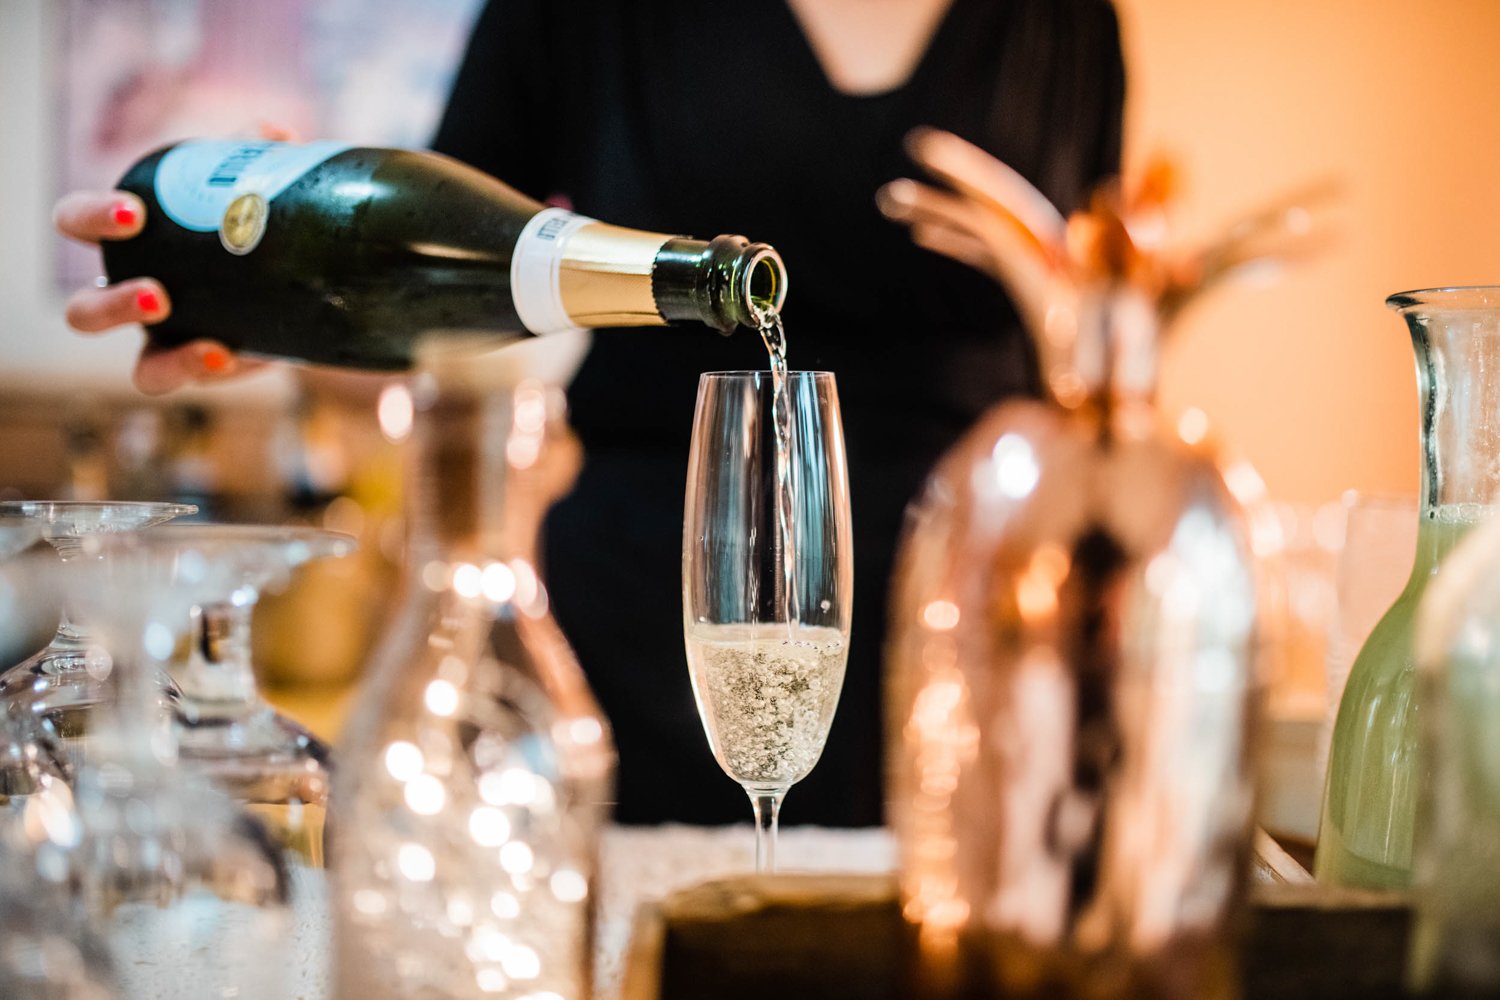 bartender pouring a glass of prosecco at wedding event